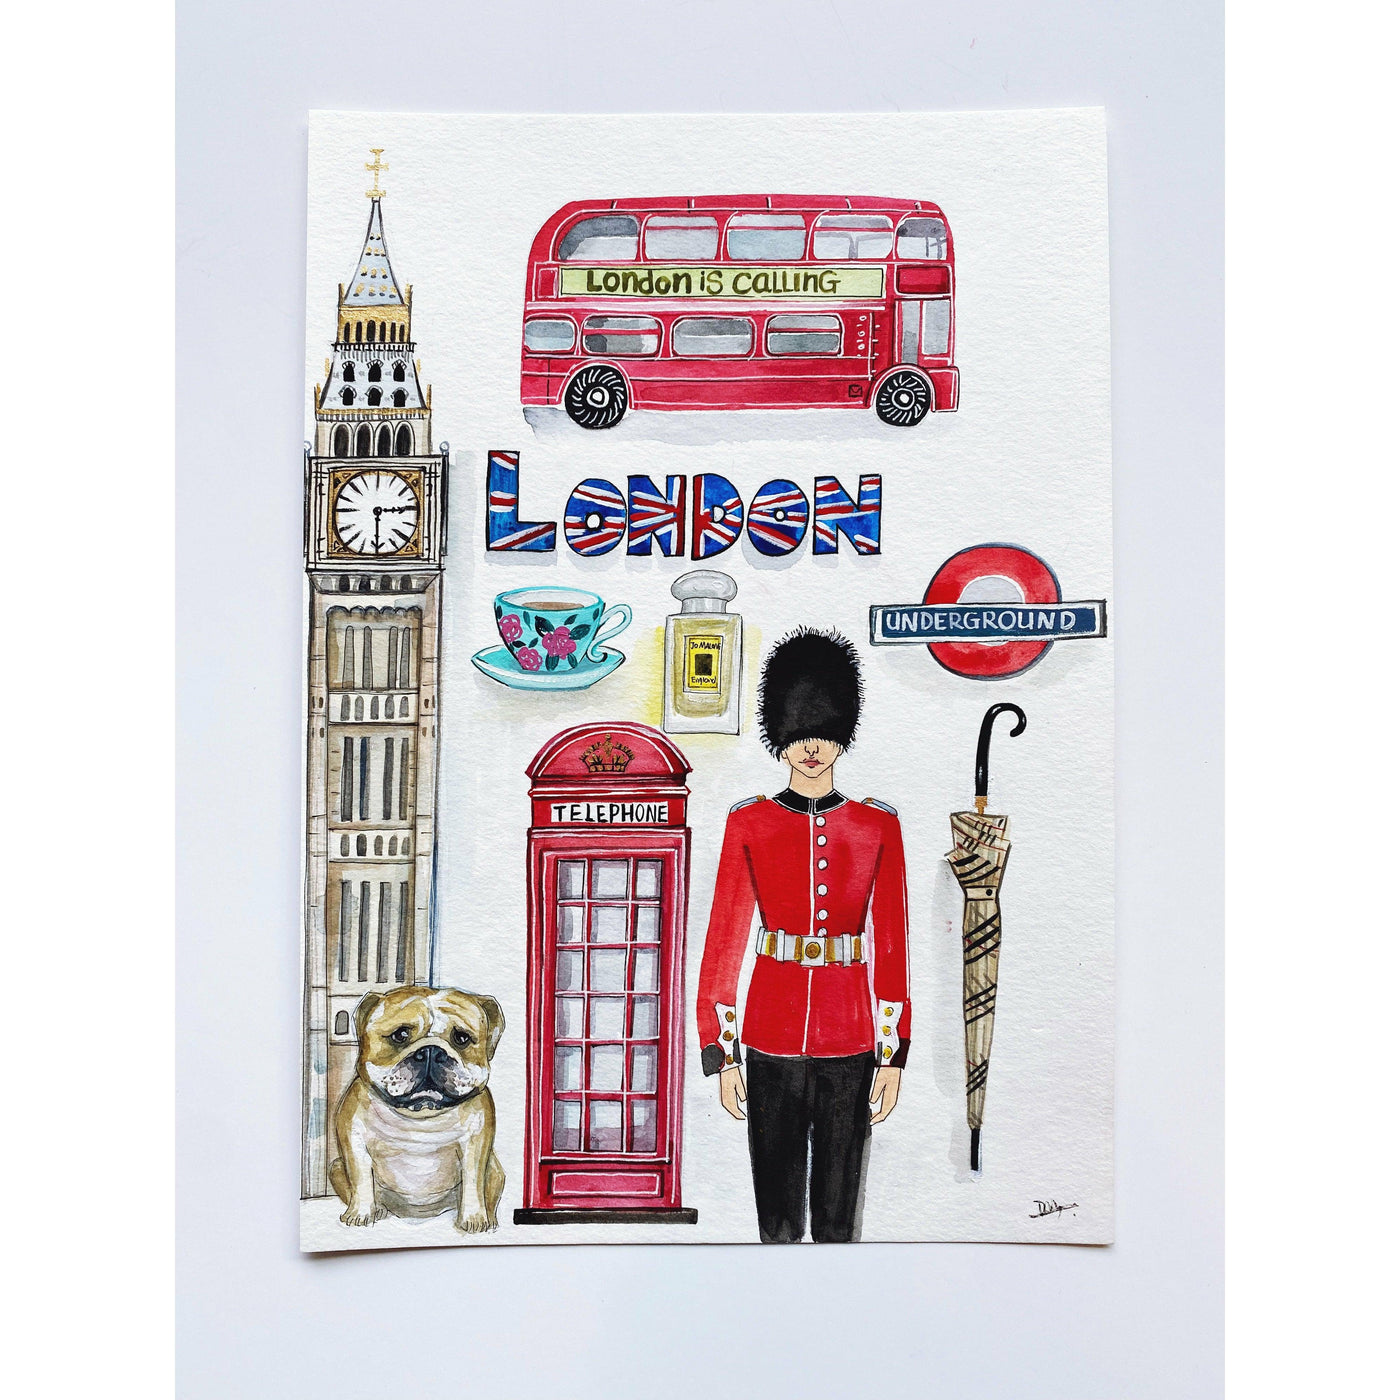 LONDON IS CALLING by Rongrong DeVoe